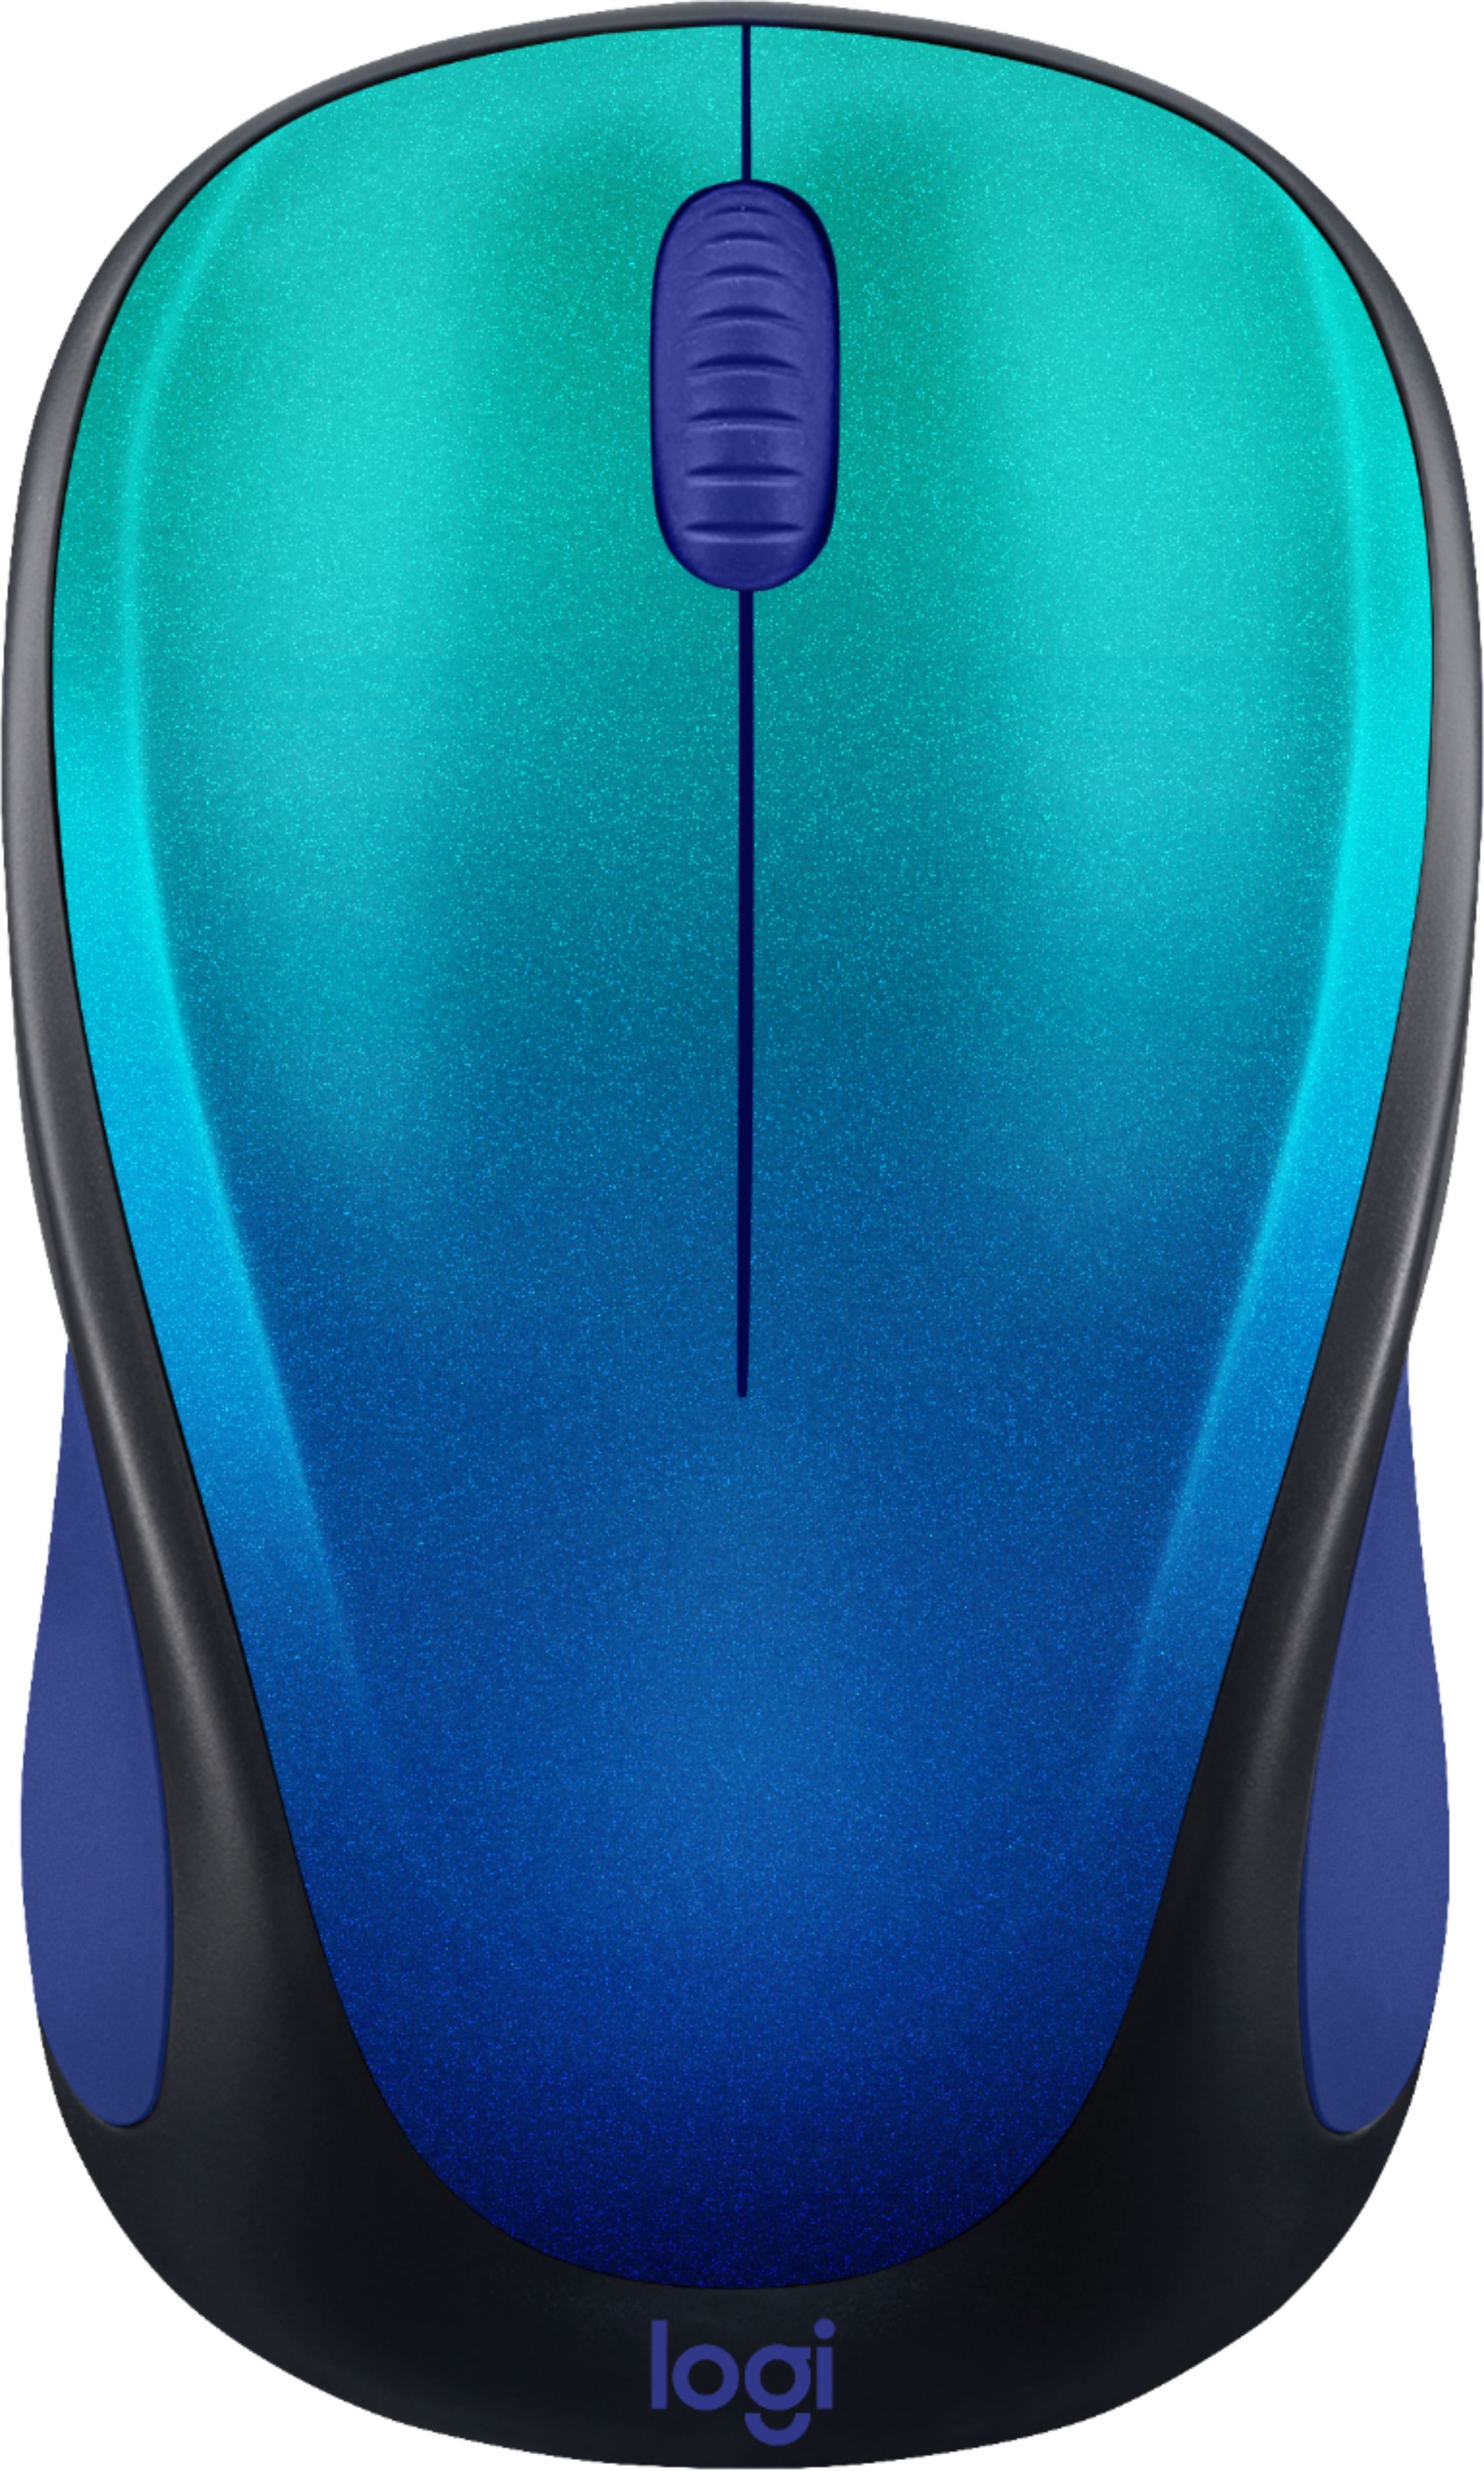 Logitech - Design Collection Limited Edition Wireless Compact Mouse with Colorful Designs - Blue Aurora